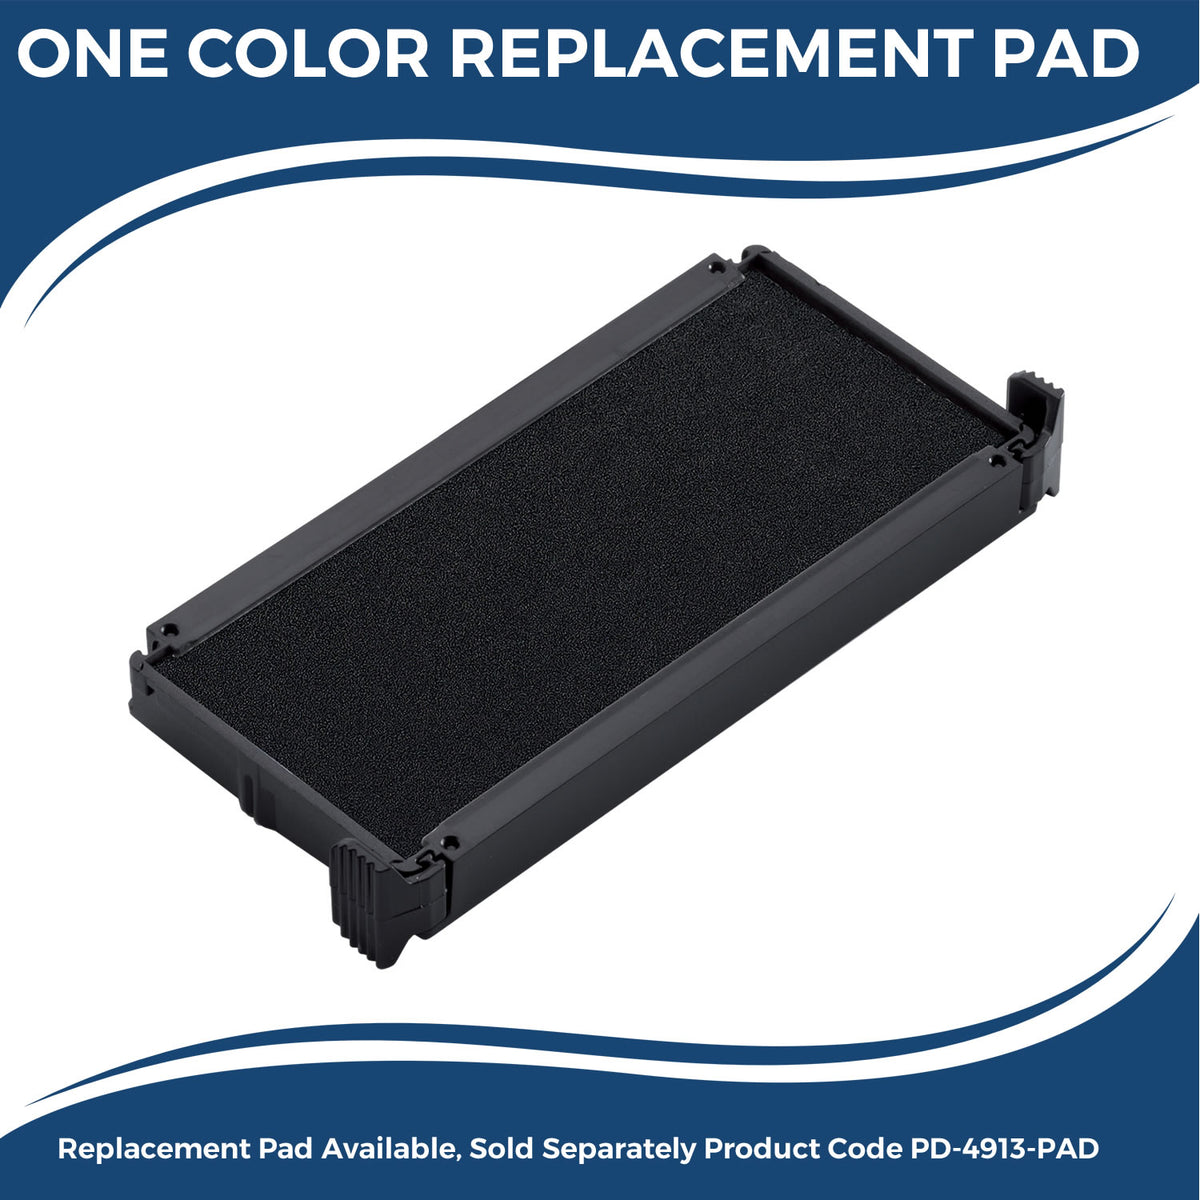 Large Self Inking Good Job Stamp 4664S Large Replacment Pad